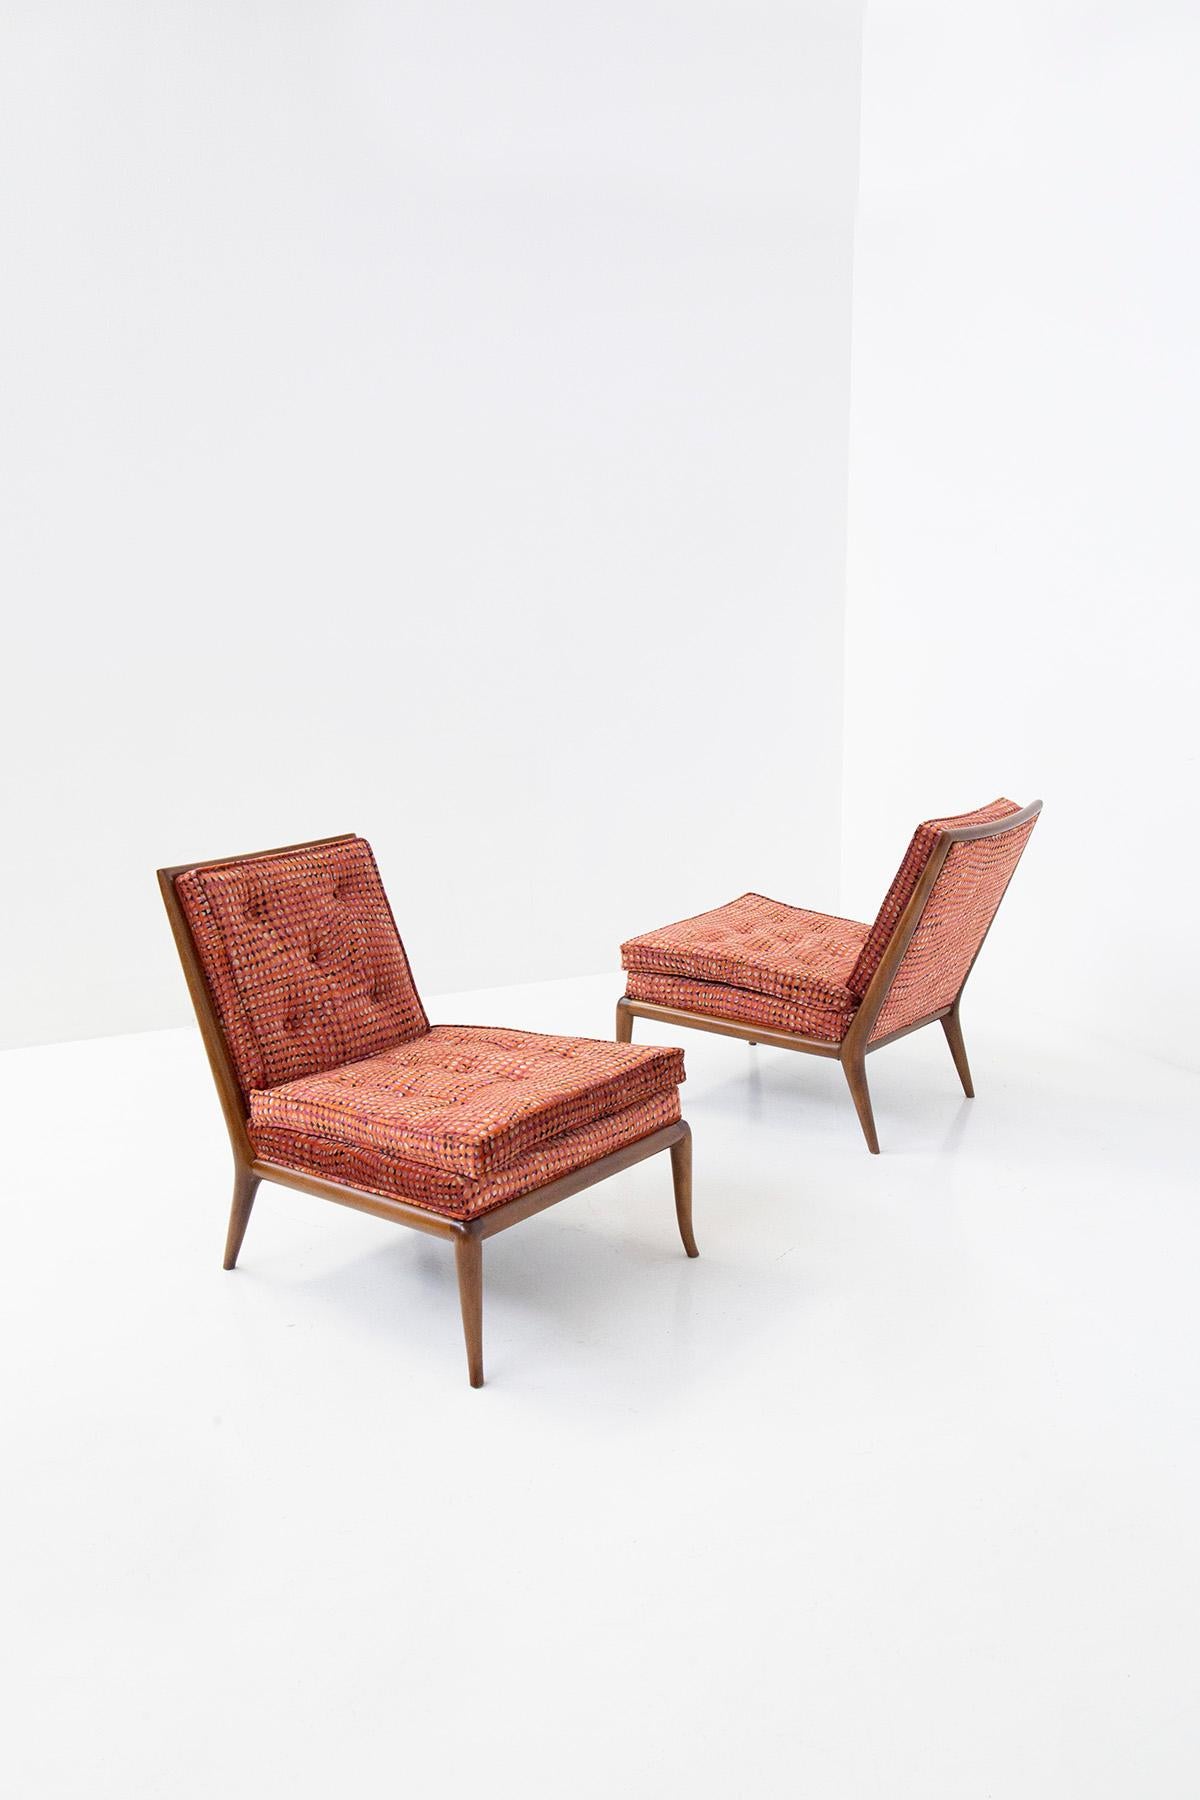 Great classic taste by U.S. designer T.H. Robsjohn-Gibbings. The pair of armchairs are from the 1950s, restored and refreshed in spectacular fabric. The new upholstered cushions provide excellent seating comfort.We note that the seat is made with a